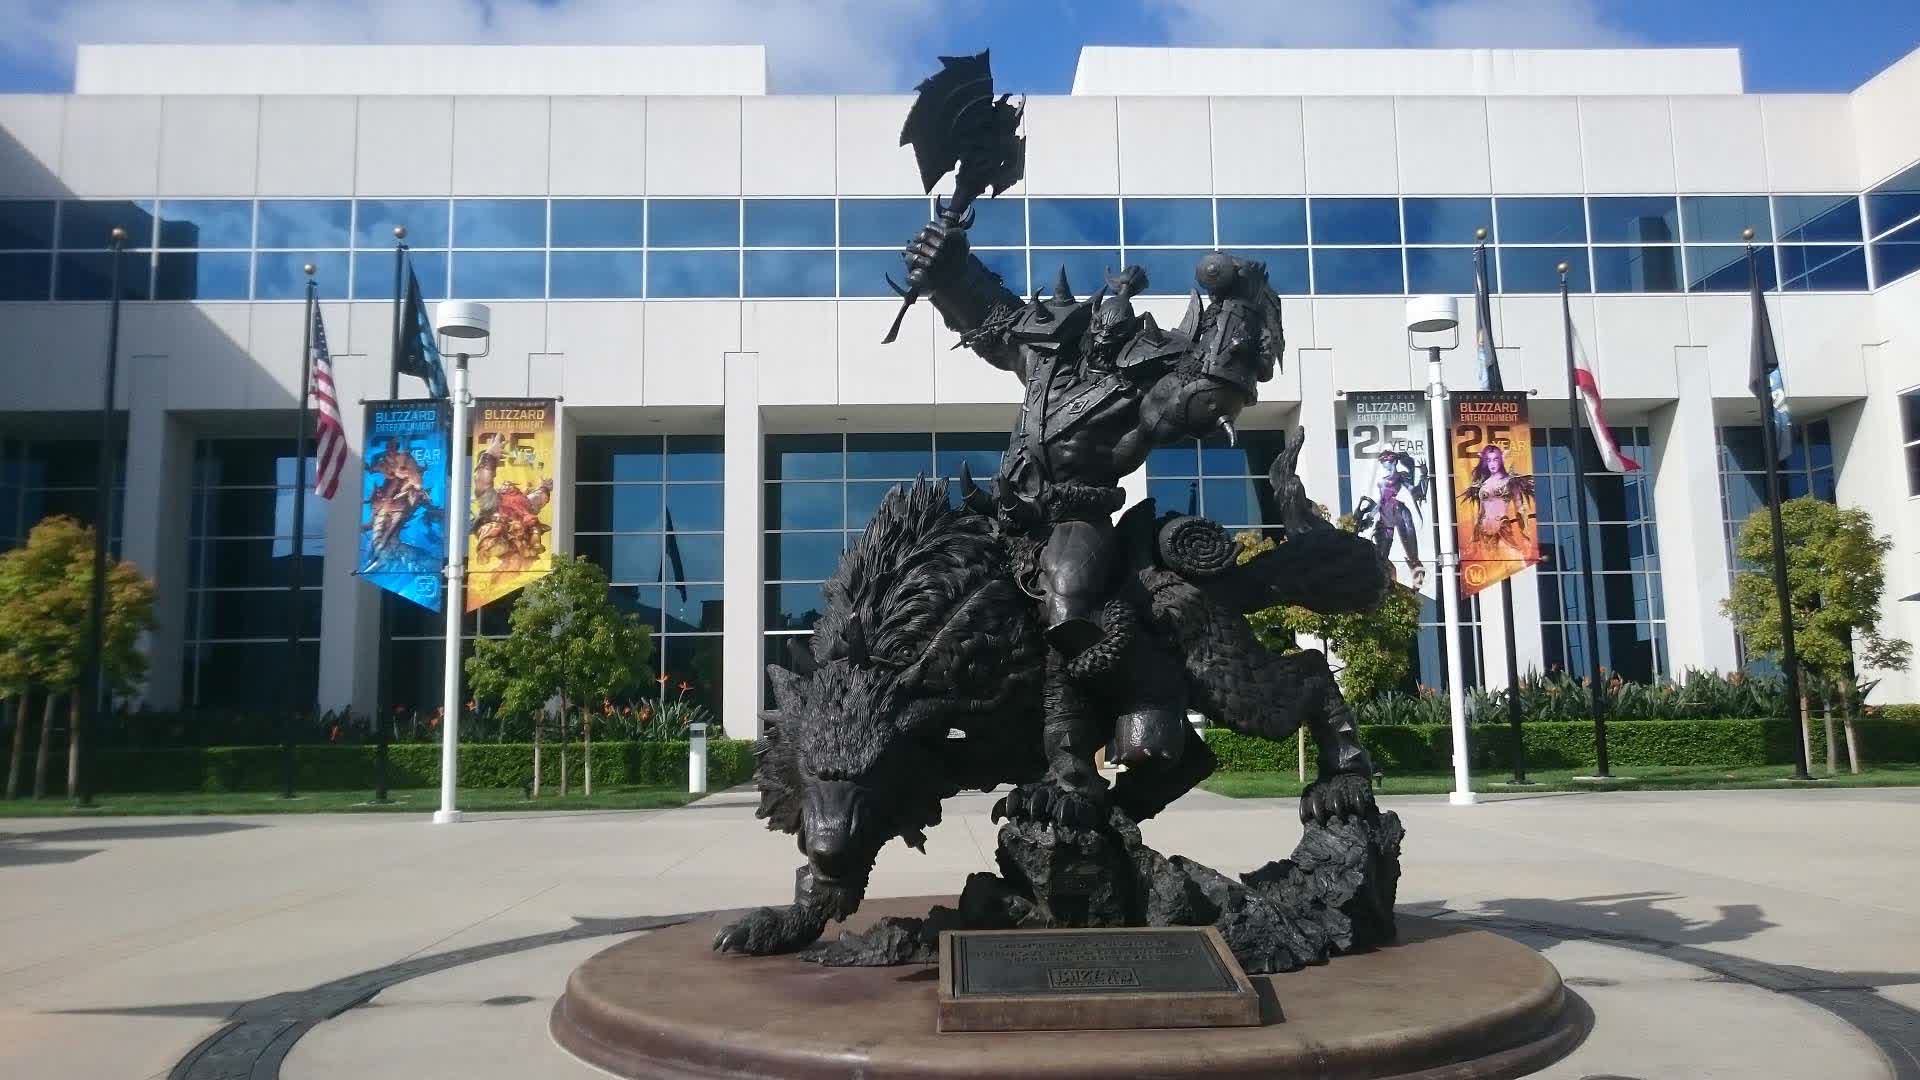 Activision Blizzard converts 1,100 QA positions to full-time, raises pay to $20 per hour